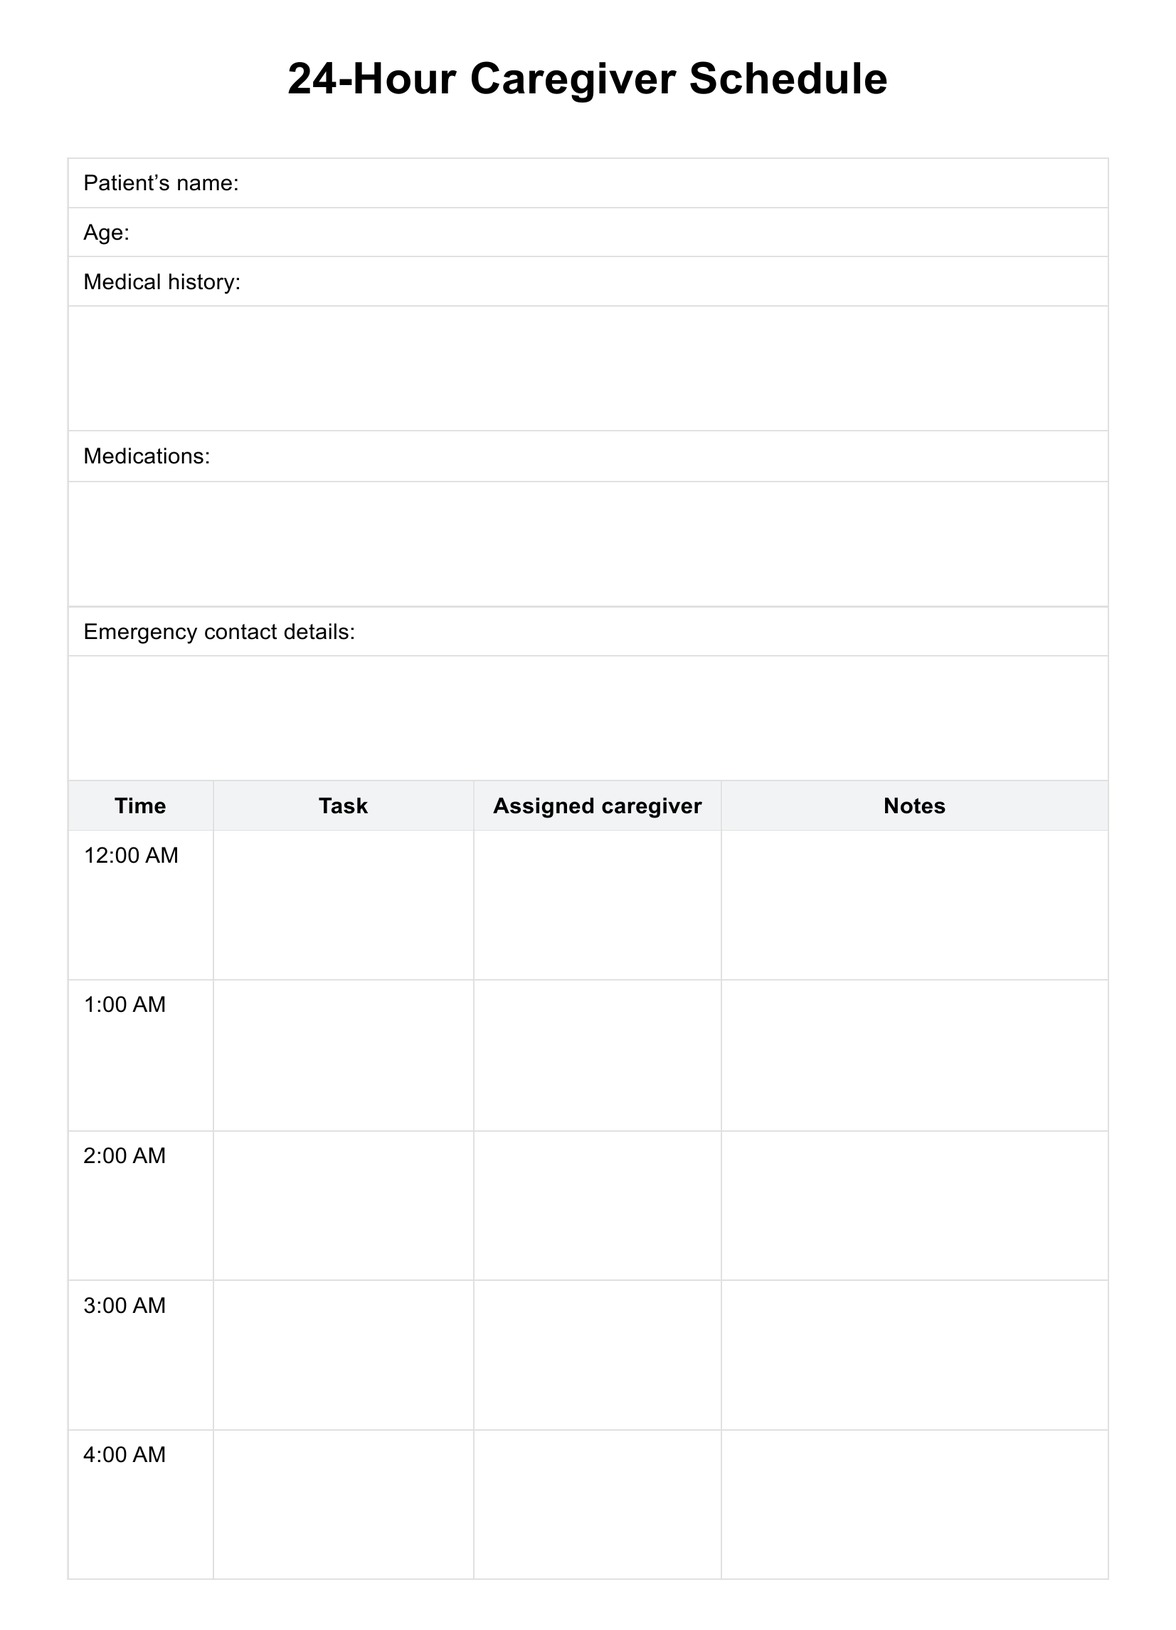 24-hour Caregiver Schedule Template PDF Example